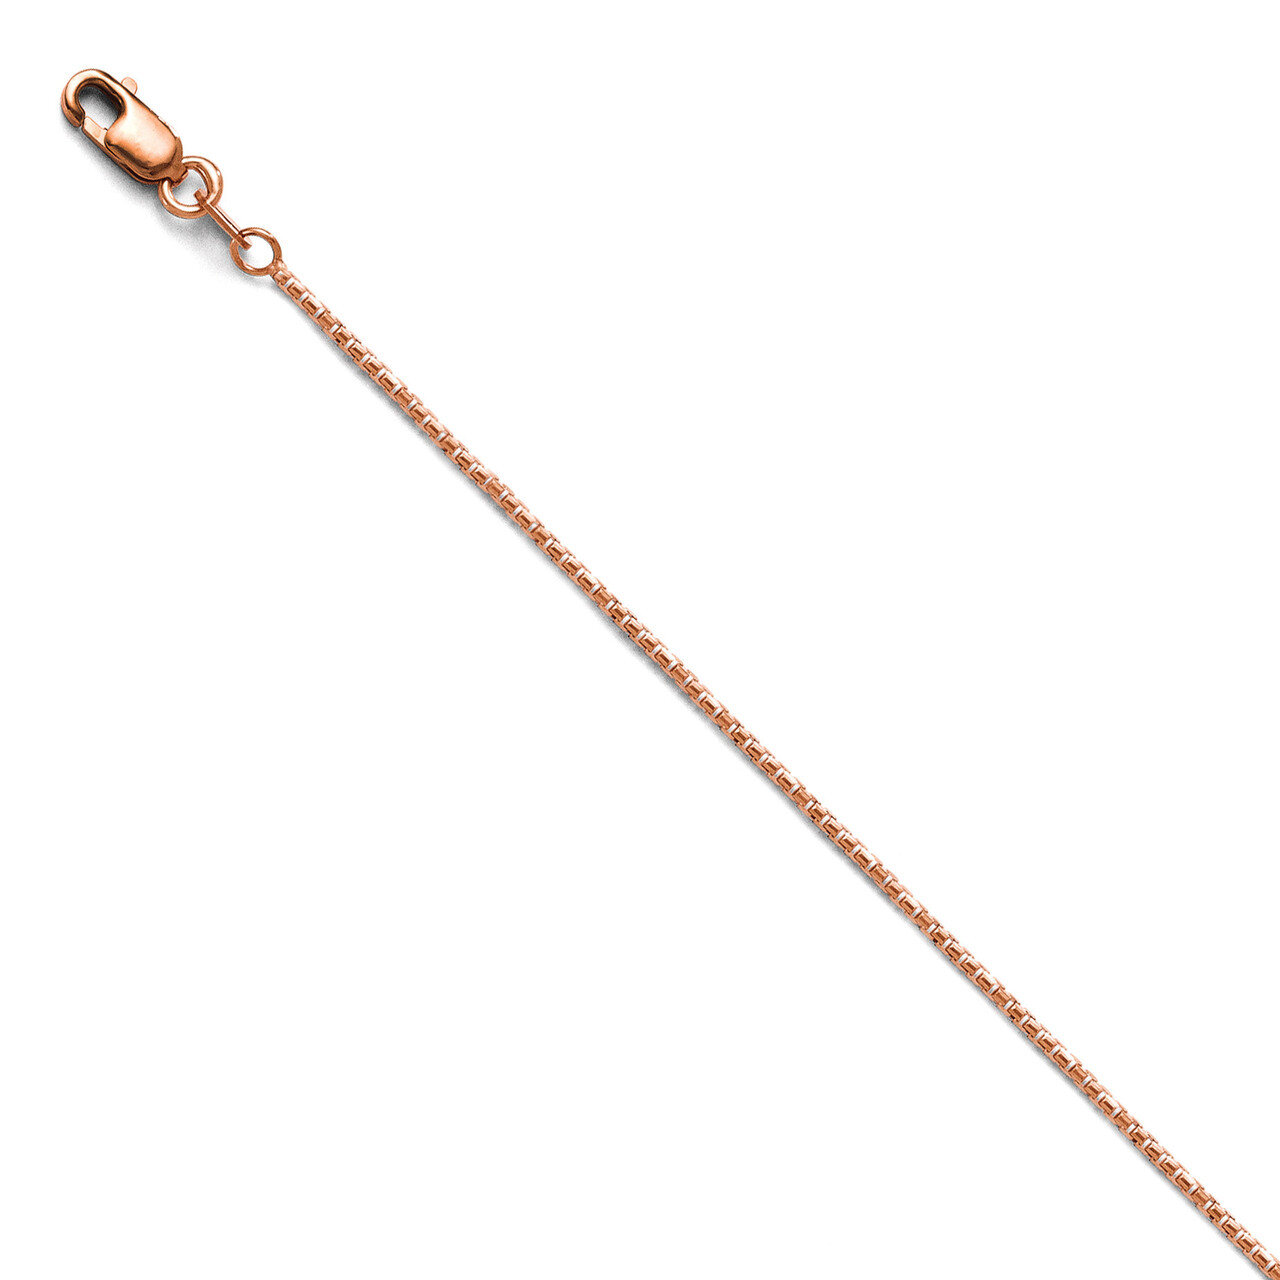 Oct. Sparkle Box Chain 18 Inch - 14k Rose Gold HB-4038-18